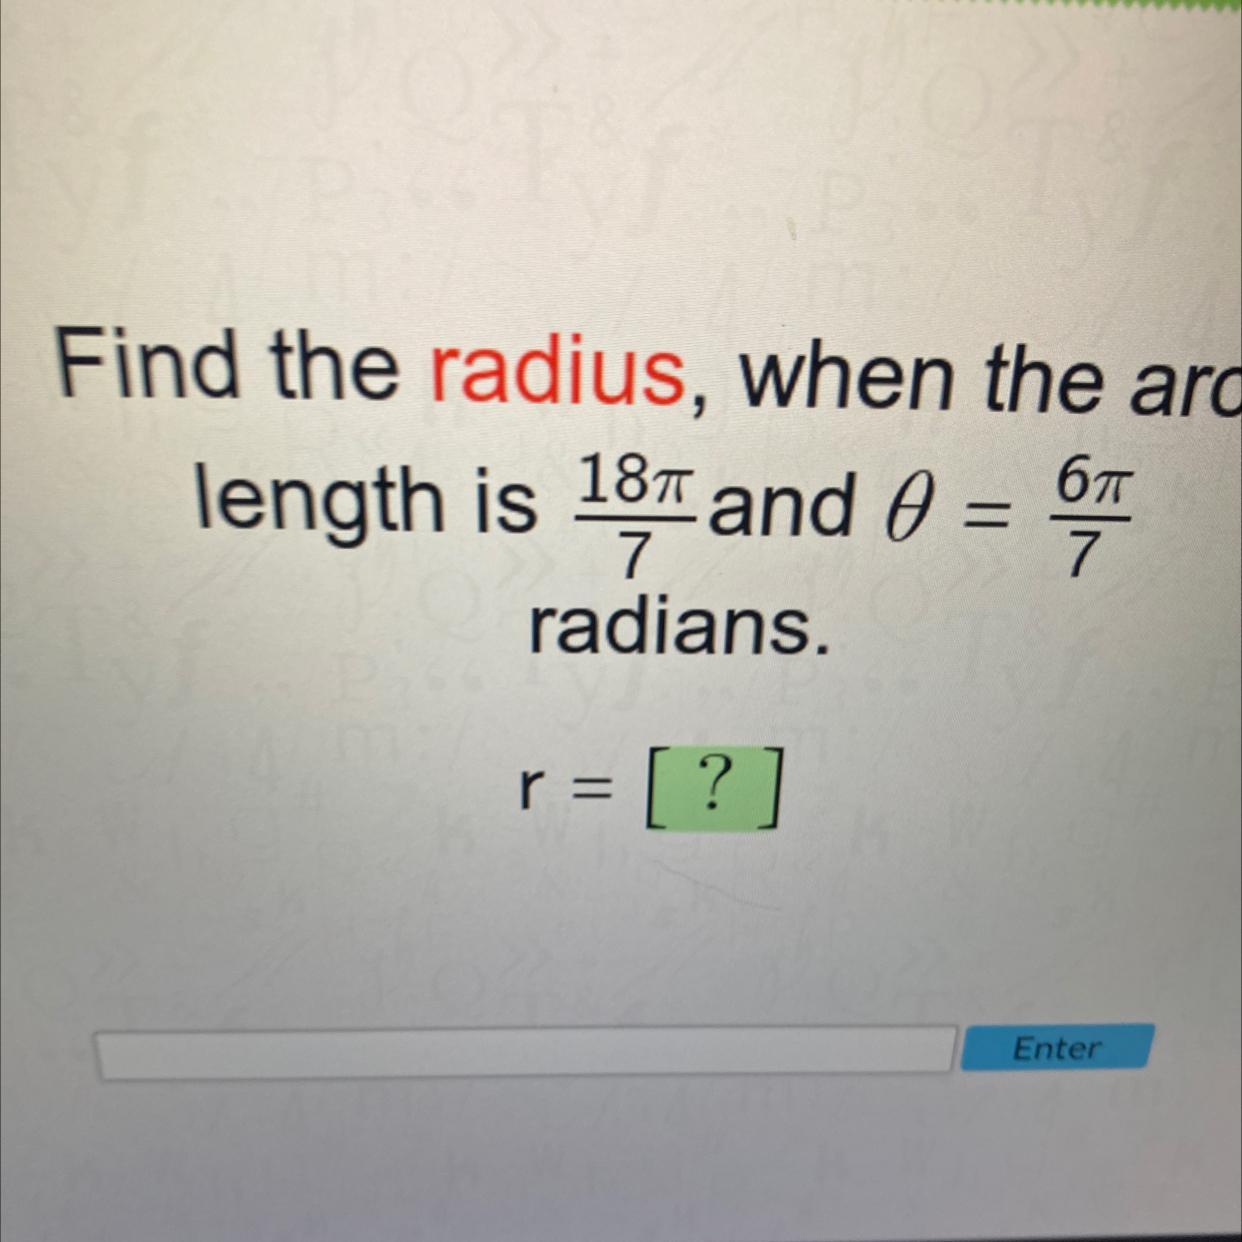 Find The Radius When The Arc Is / And / Radians